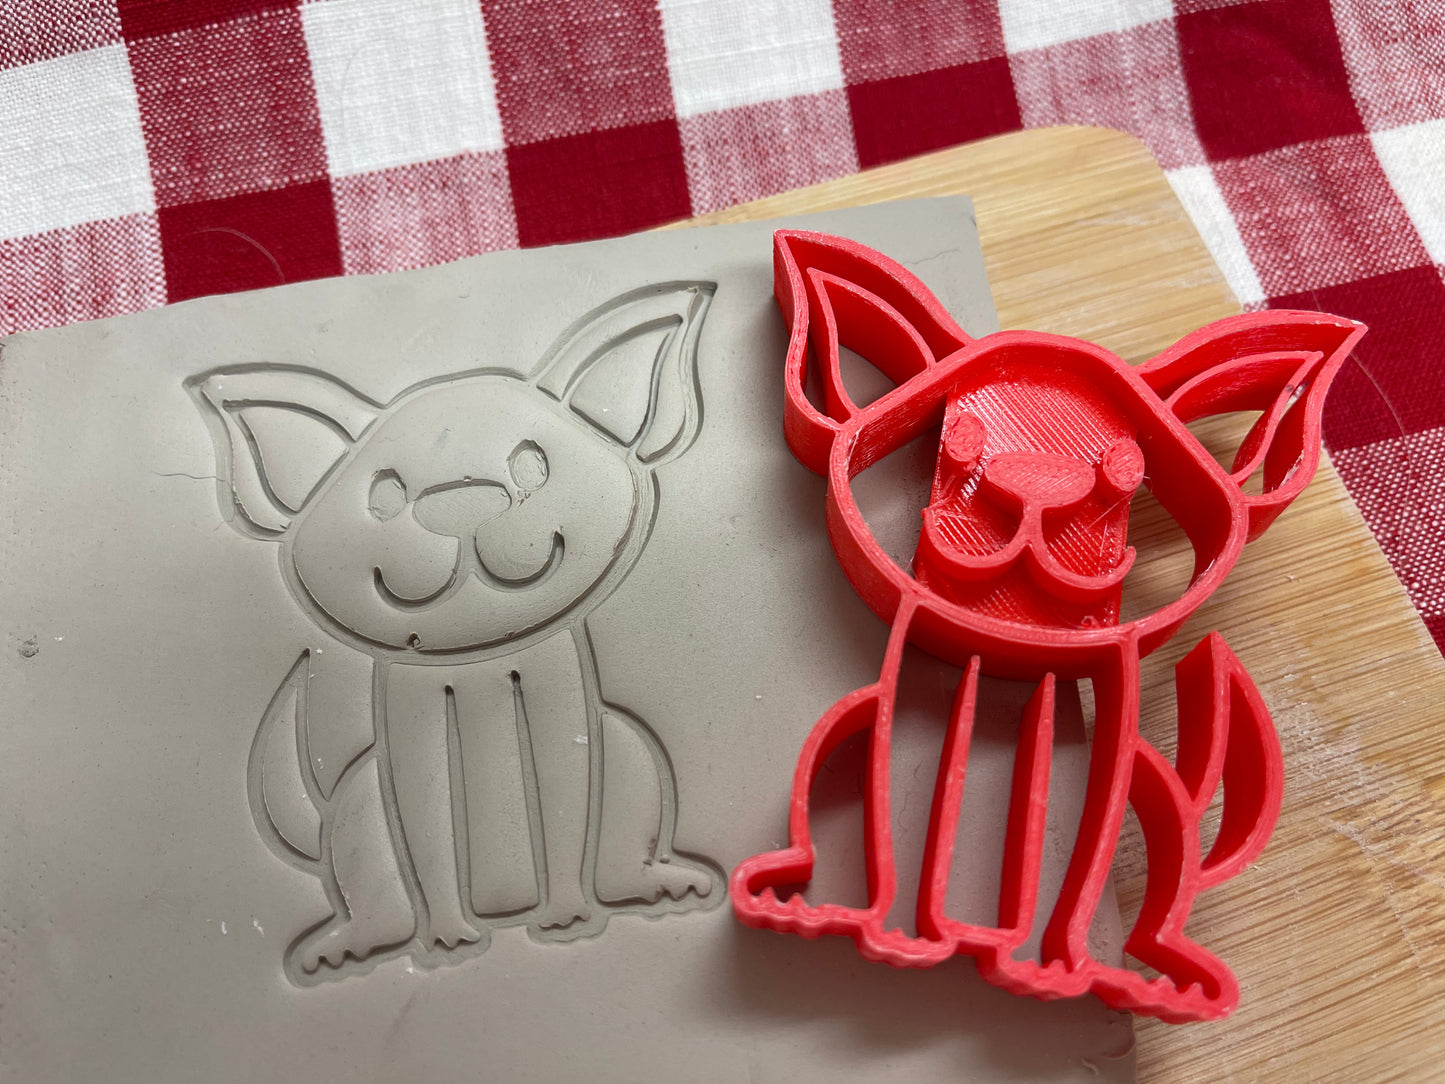 Chihuahua Dog Reversible Pottery Stamp - Pet doodle series, pottery tool - multiple sizes